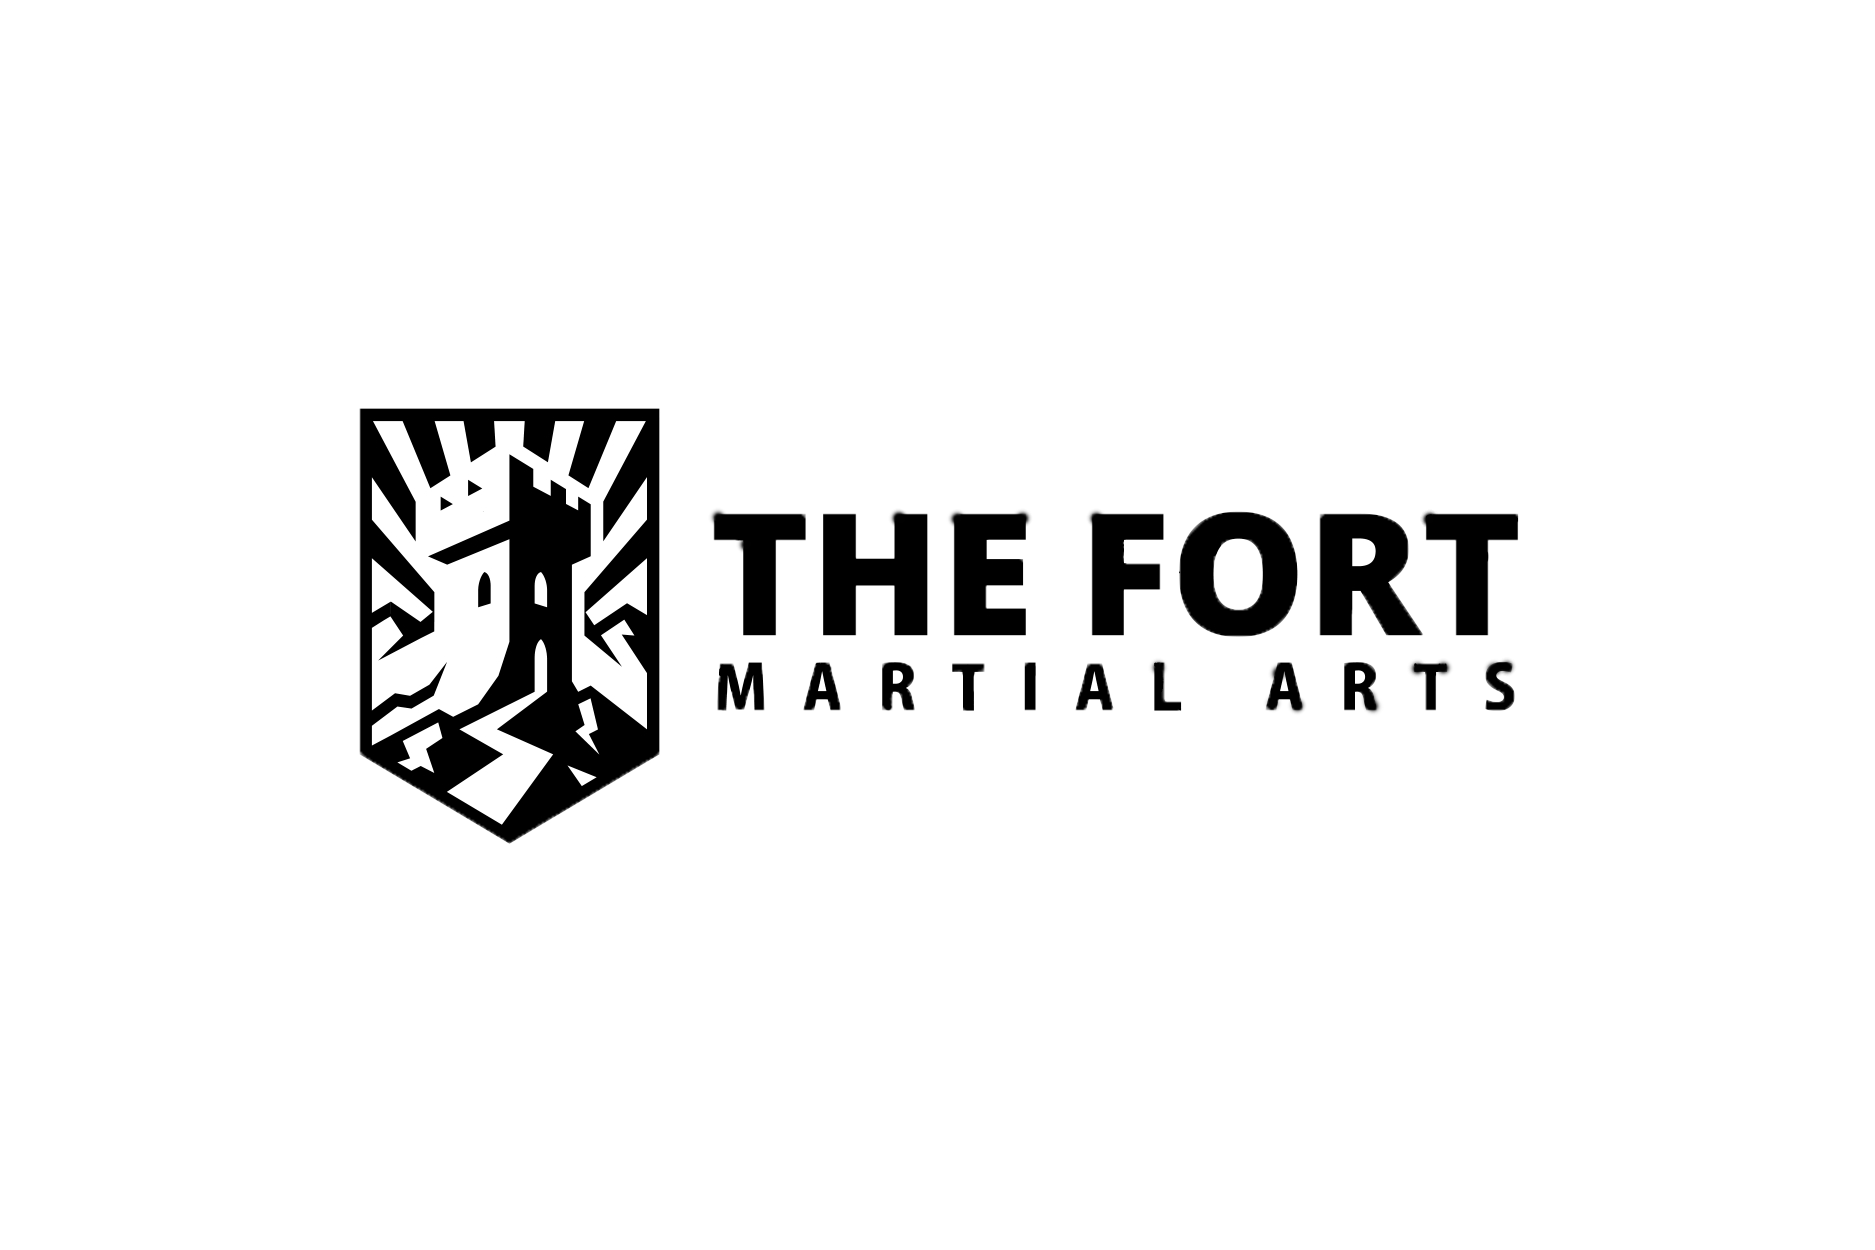 The Fort Martial Arts